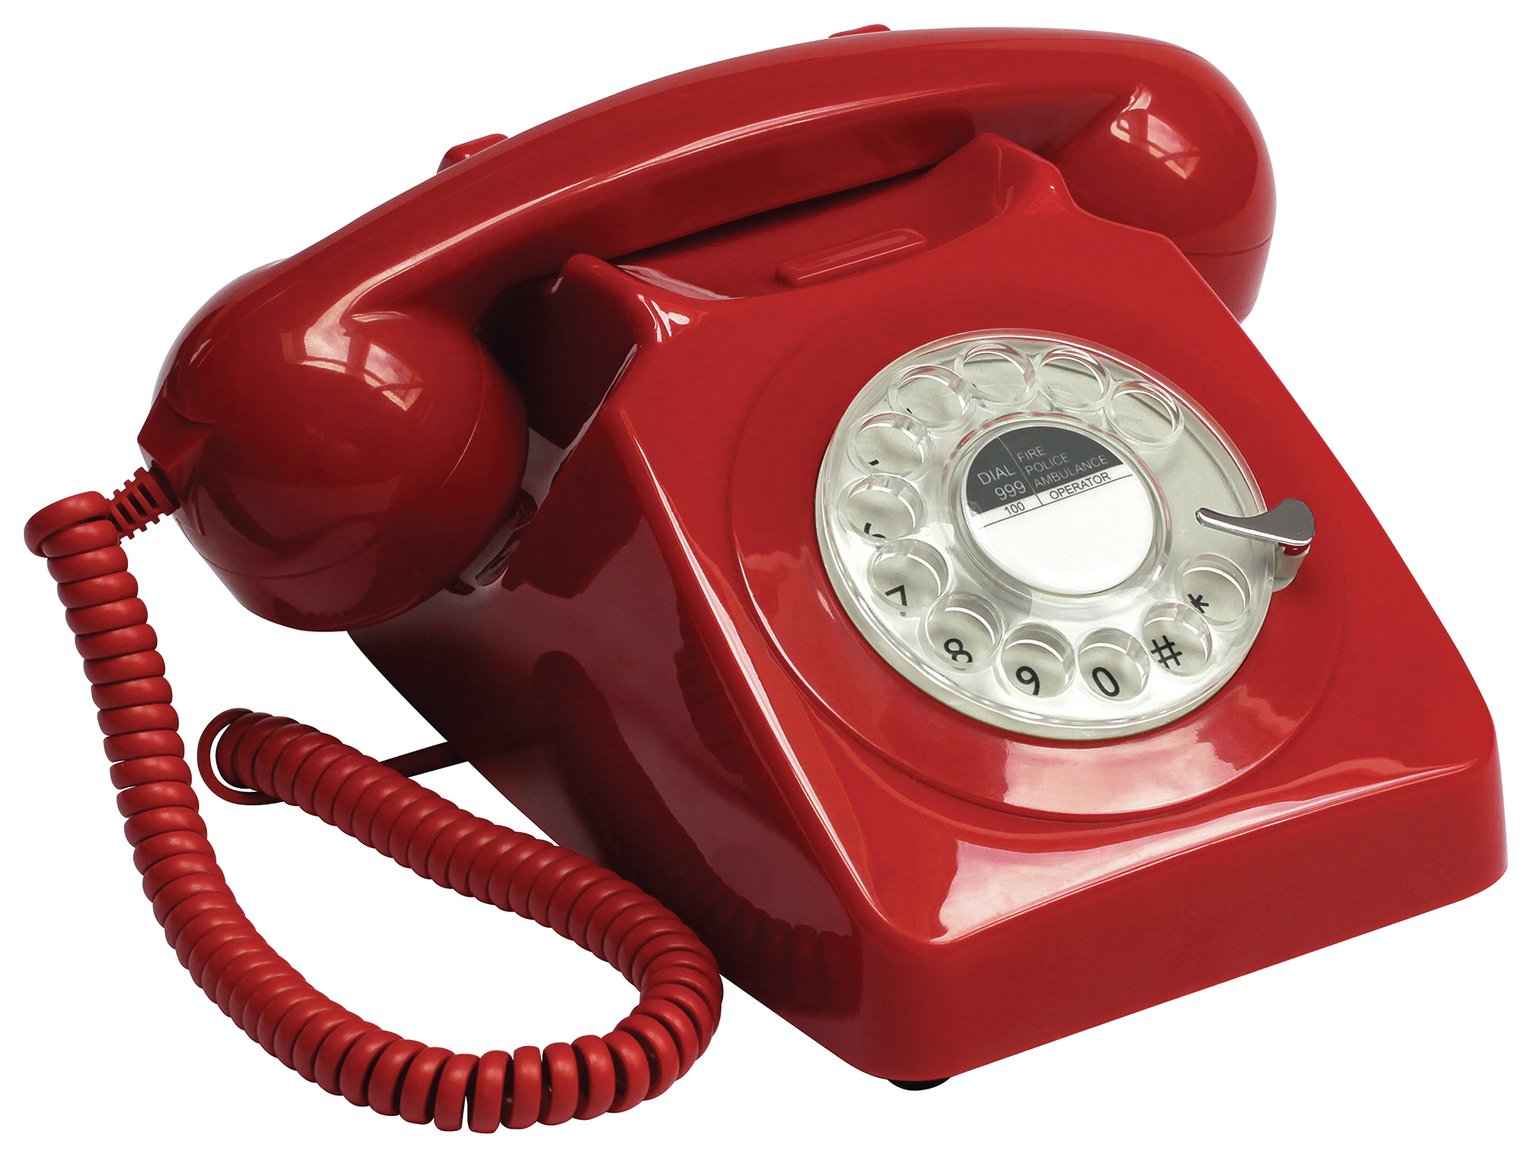 GPO 746 Rotary Dial Corded Telephone Review